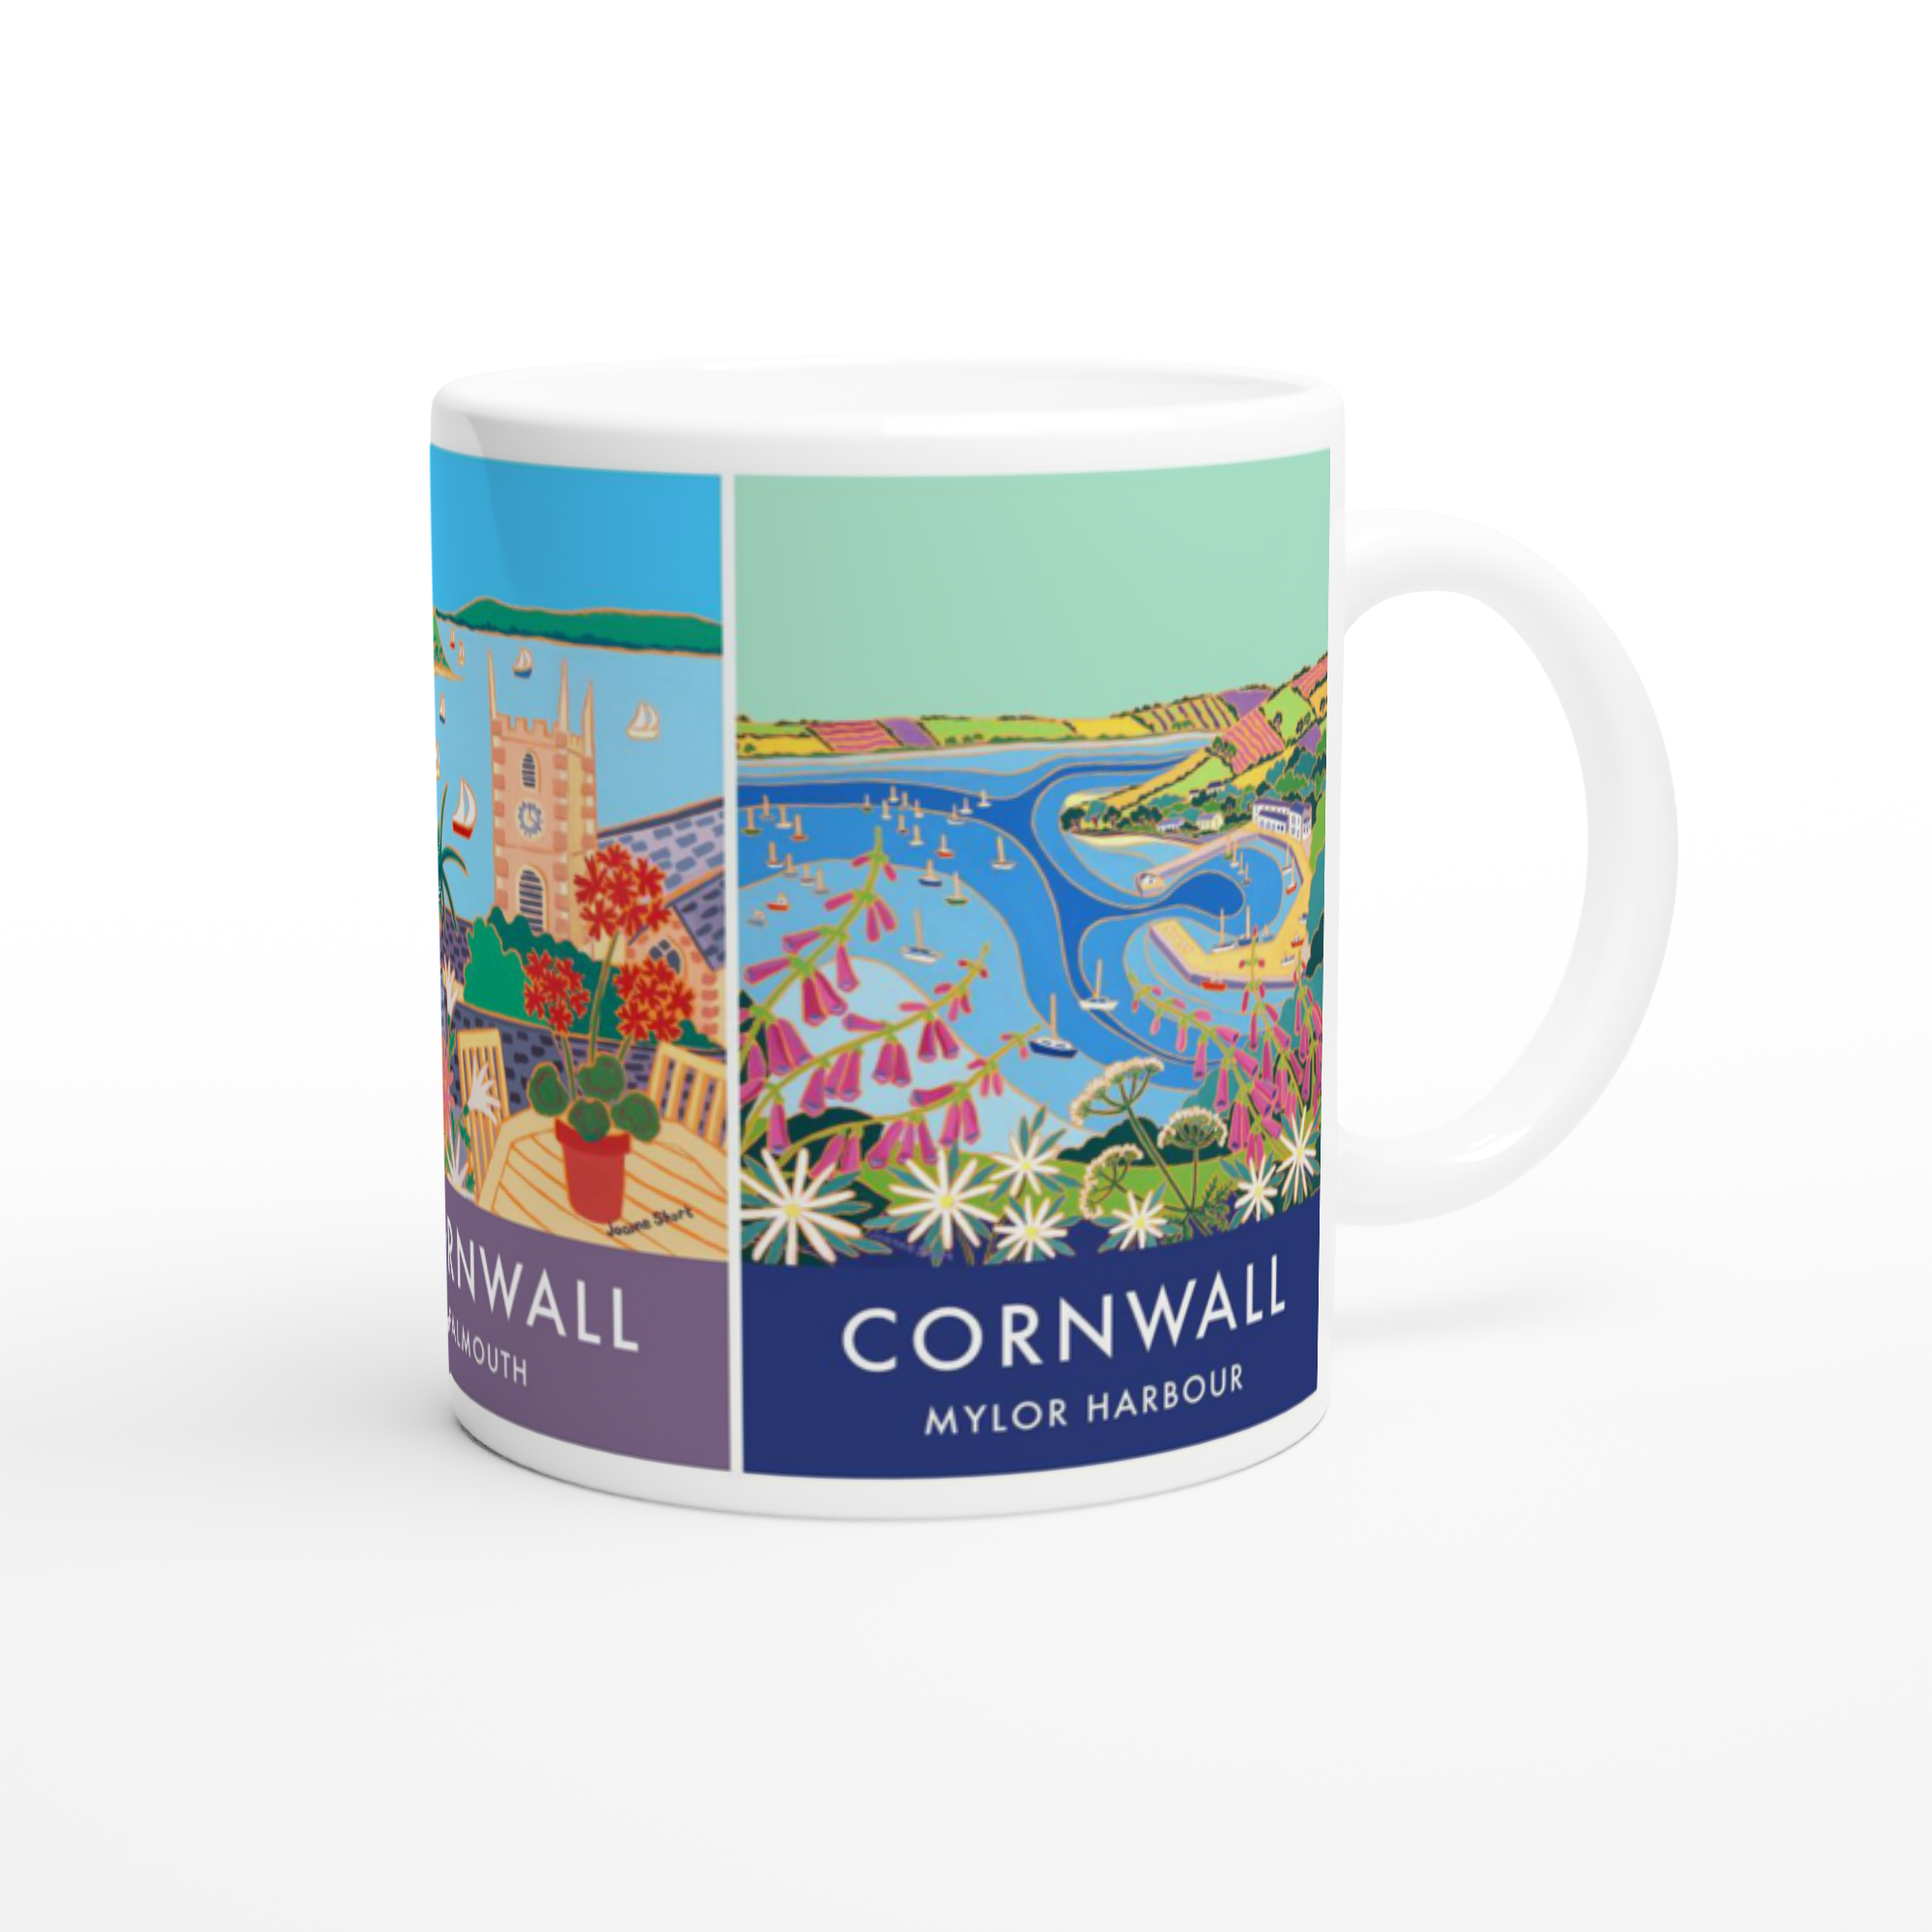 Art Mug of Falmouth and Mylor Harbour in Cornwall by Joanne Short